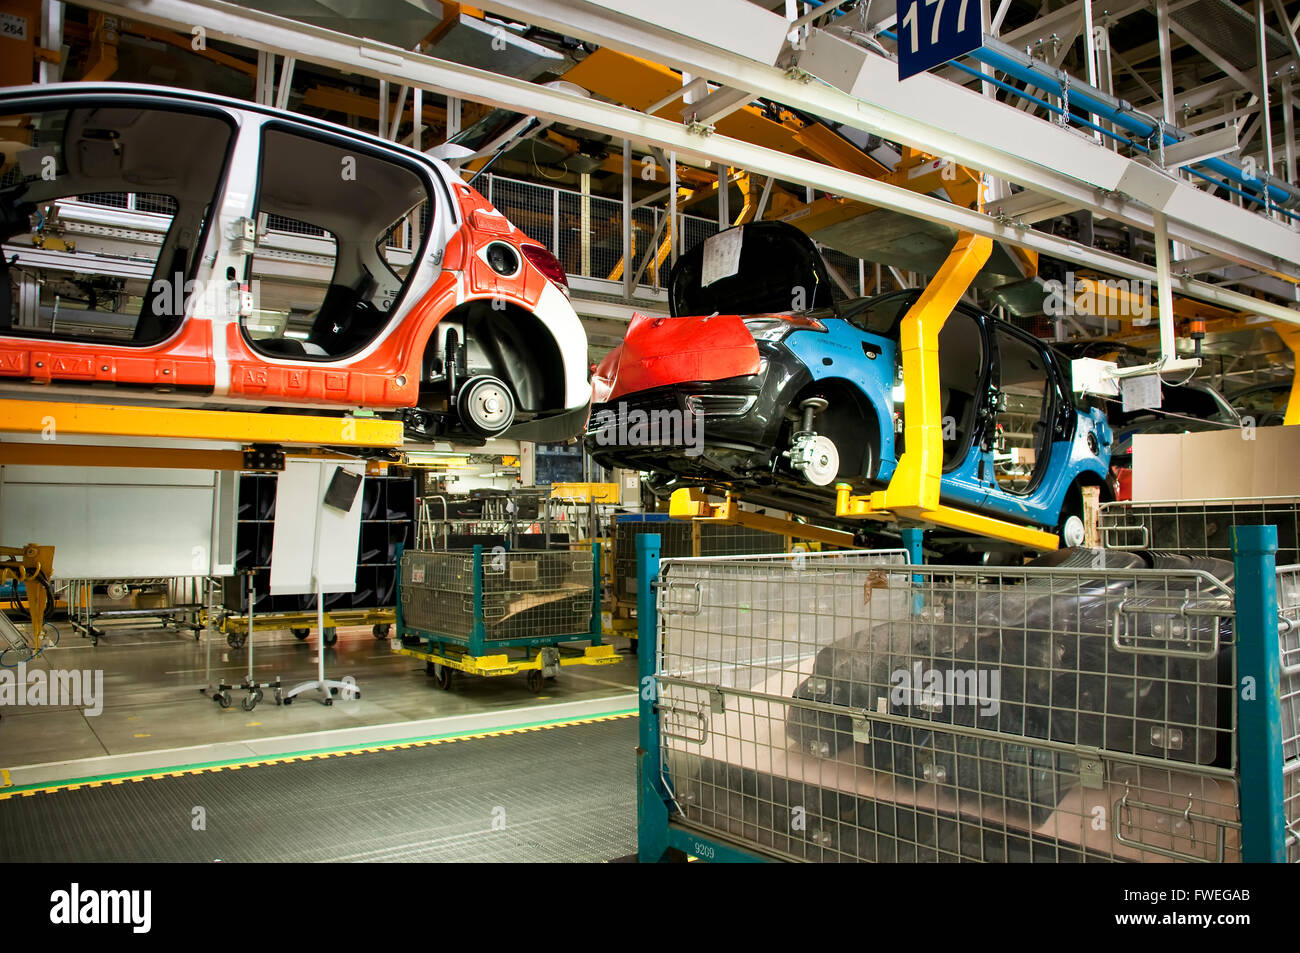 Automotive industry manufacture line with different metal parts Stock Photo